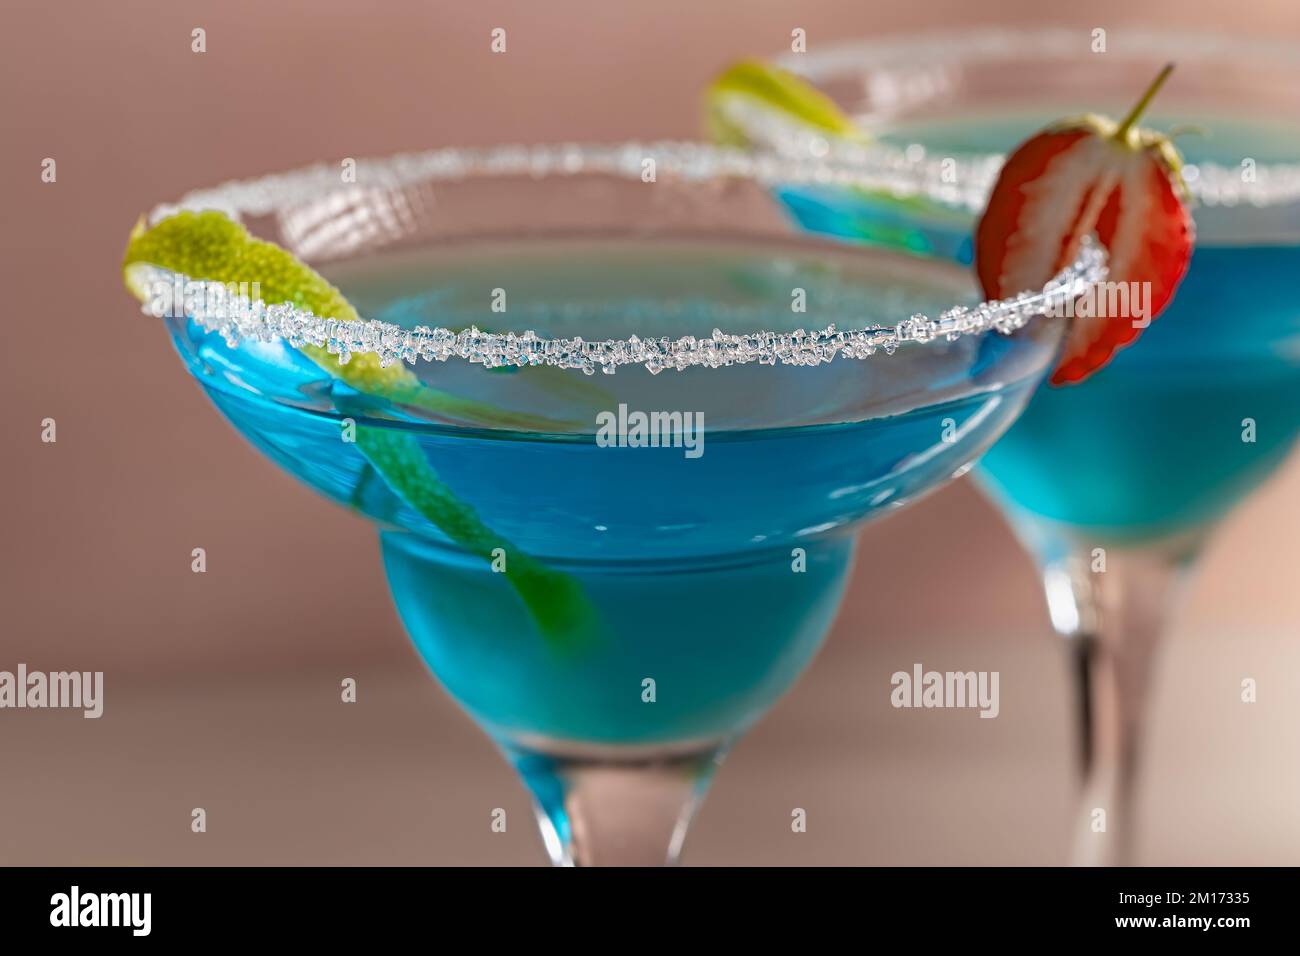 https://c8.alamy.com/comp/2M17335/two-glasses-with-blue-margarita-cocktail-garnished-with-lime-zest-and-strawberries-selective-focus-2M17335.jpg